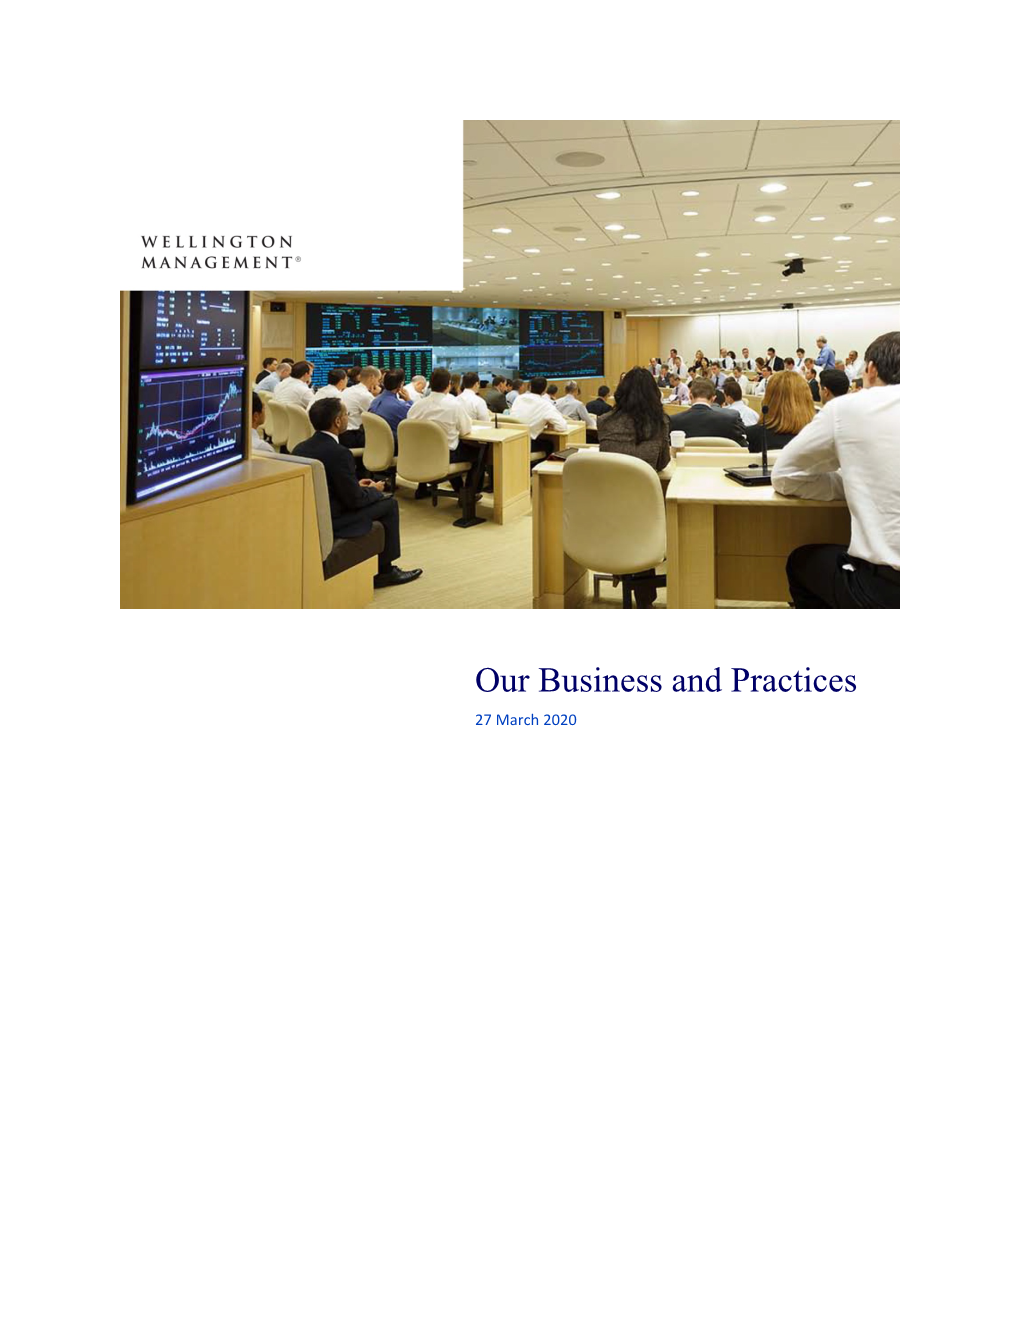 Our Business and Practices 27 March 2020